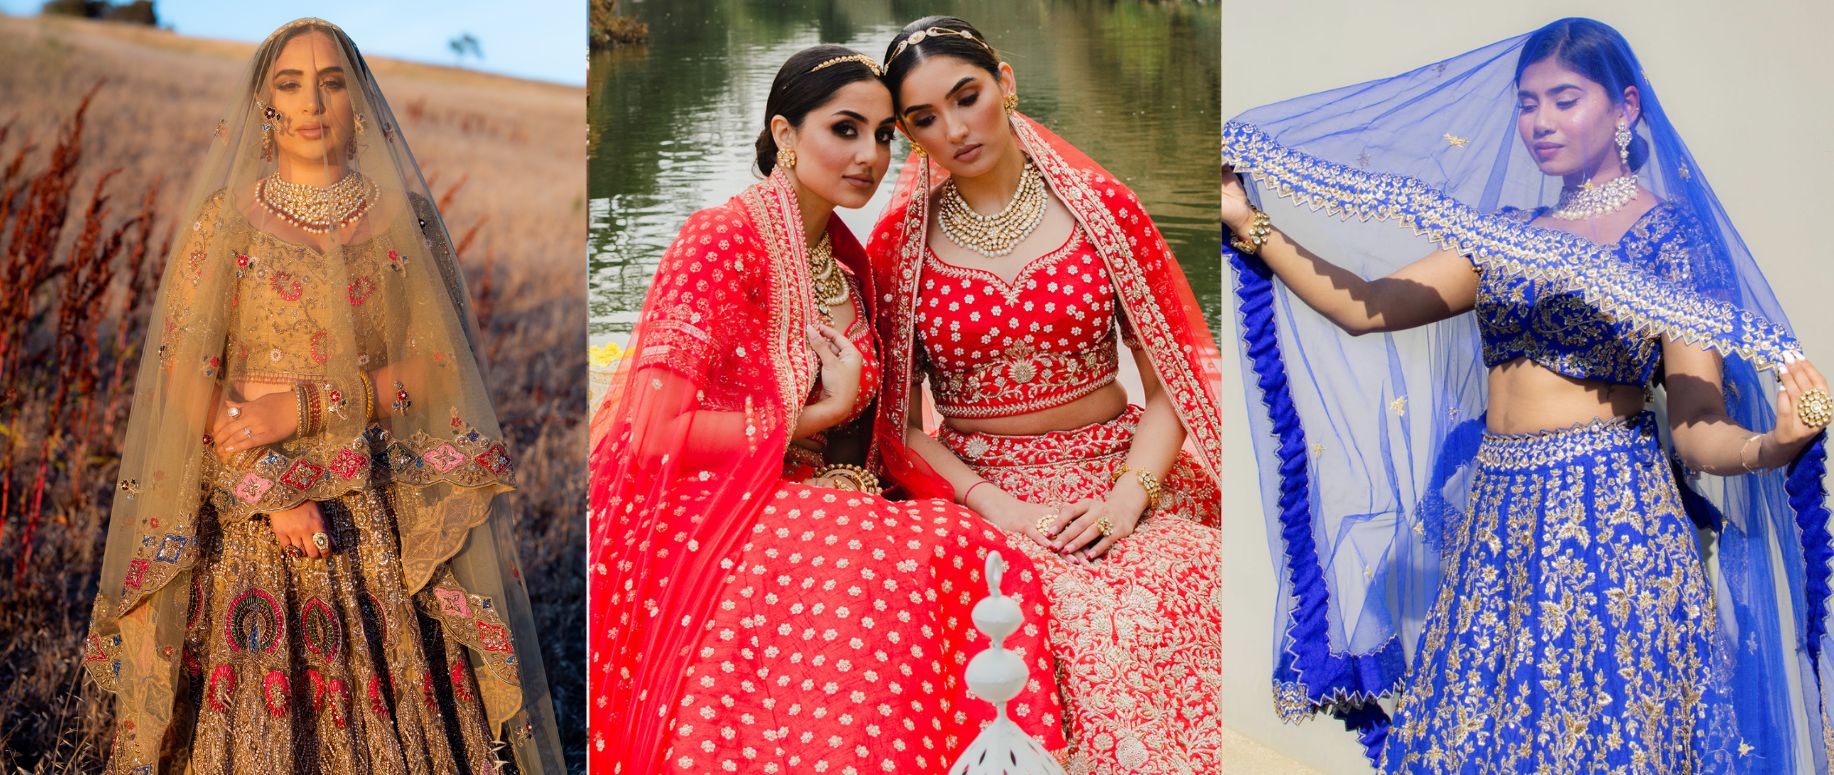 The Ultimate South Asian Style Guide: Sarees – The Big Fat Indian